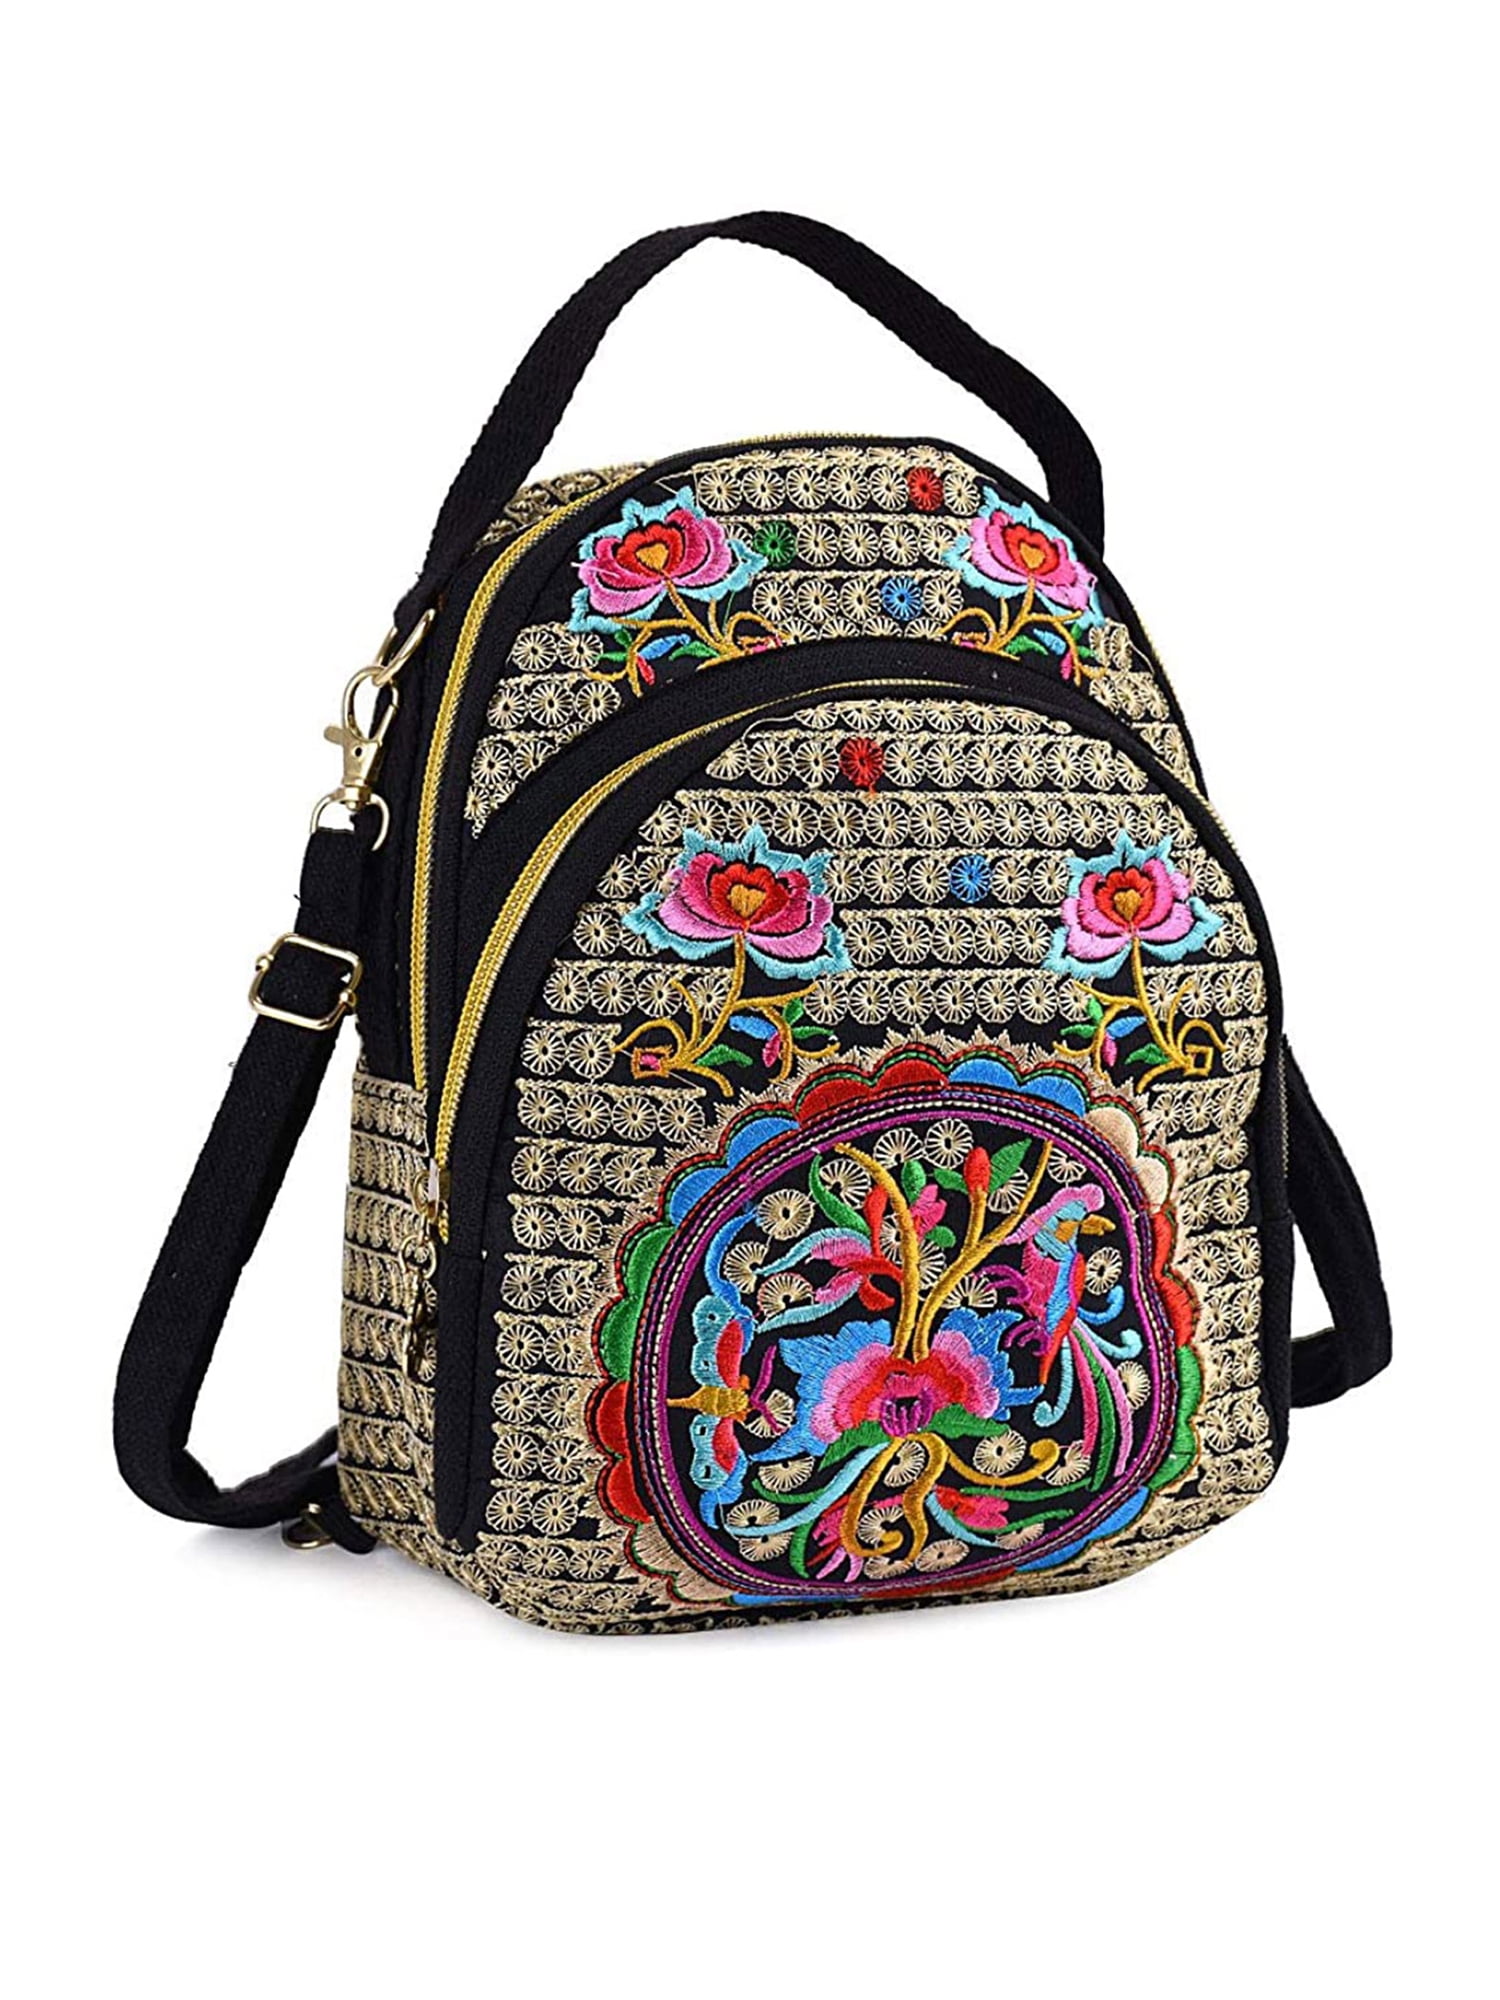 Blossom Cactus Printed Casual Laptop Backpack College School Bag Travel Daypack 